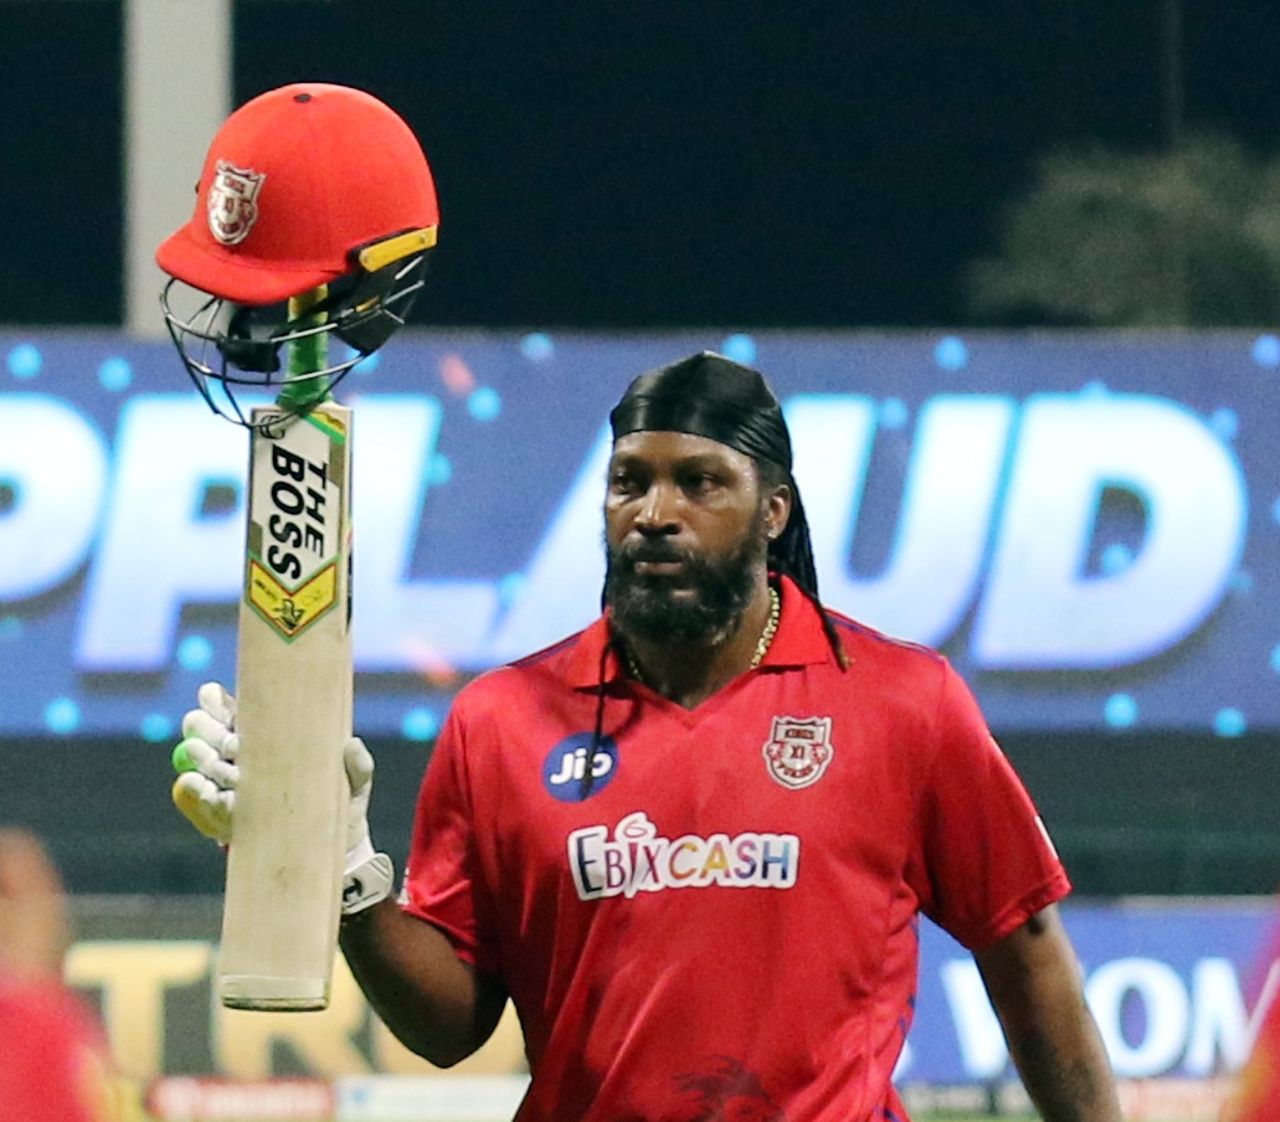 Chris Gayle - the boss even when he's out for 99, Kings XI Punjab vs Rajasthan Royals, IPL 2020, Abu Dhabi, October 30, 2020